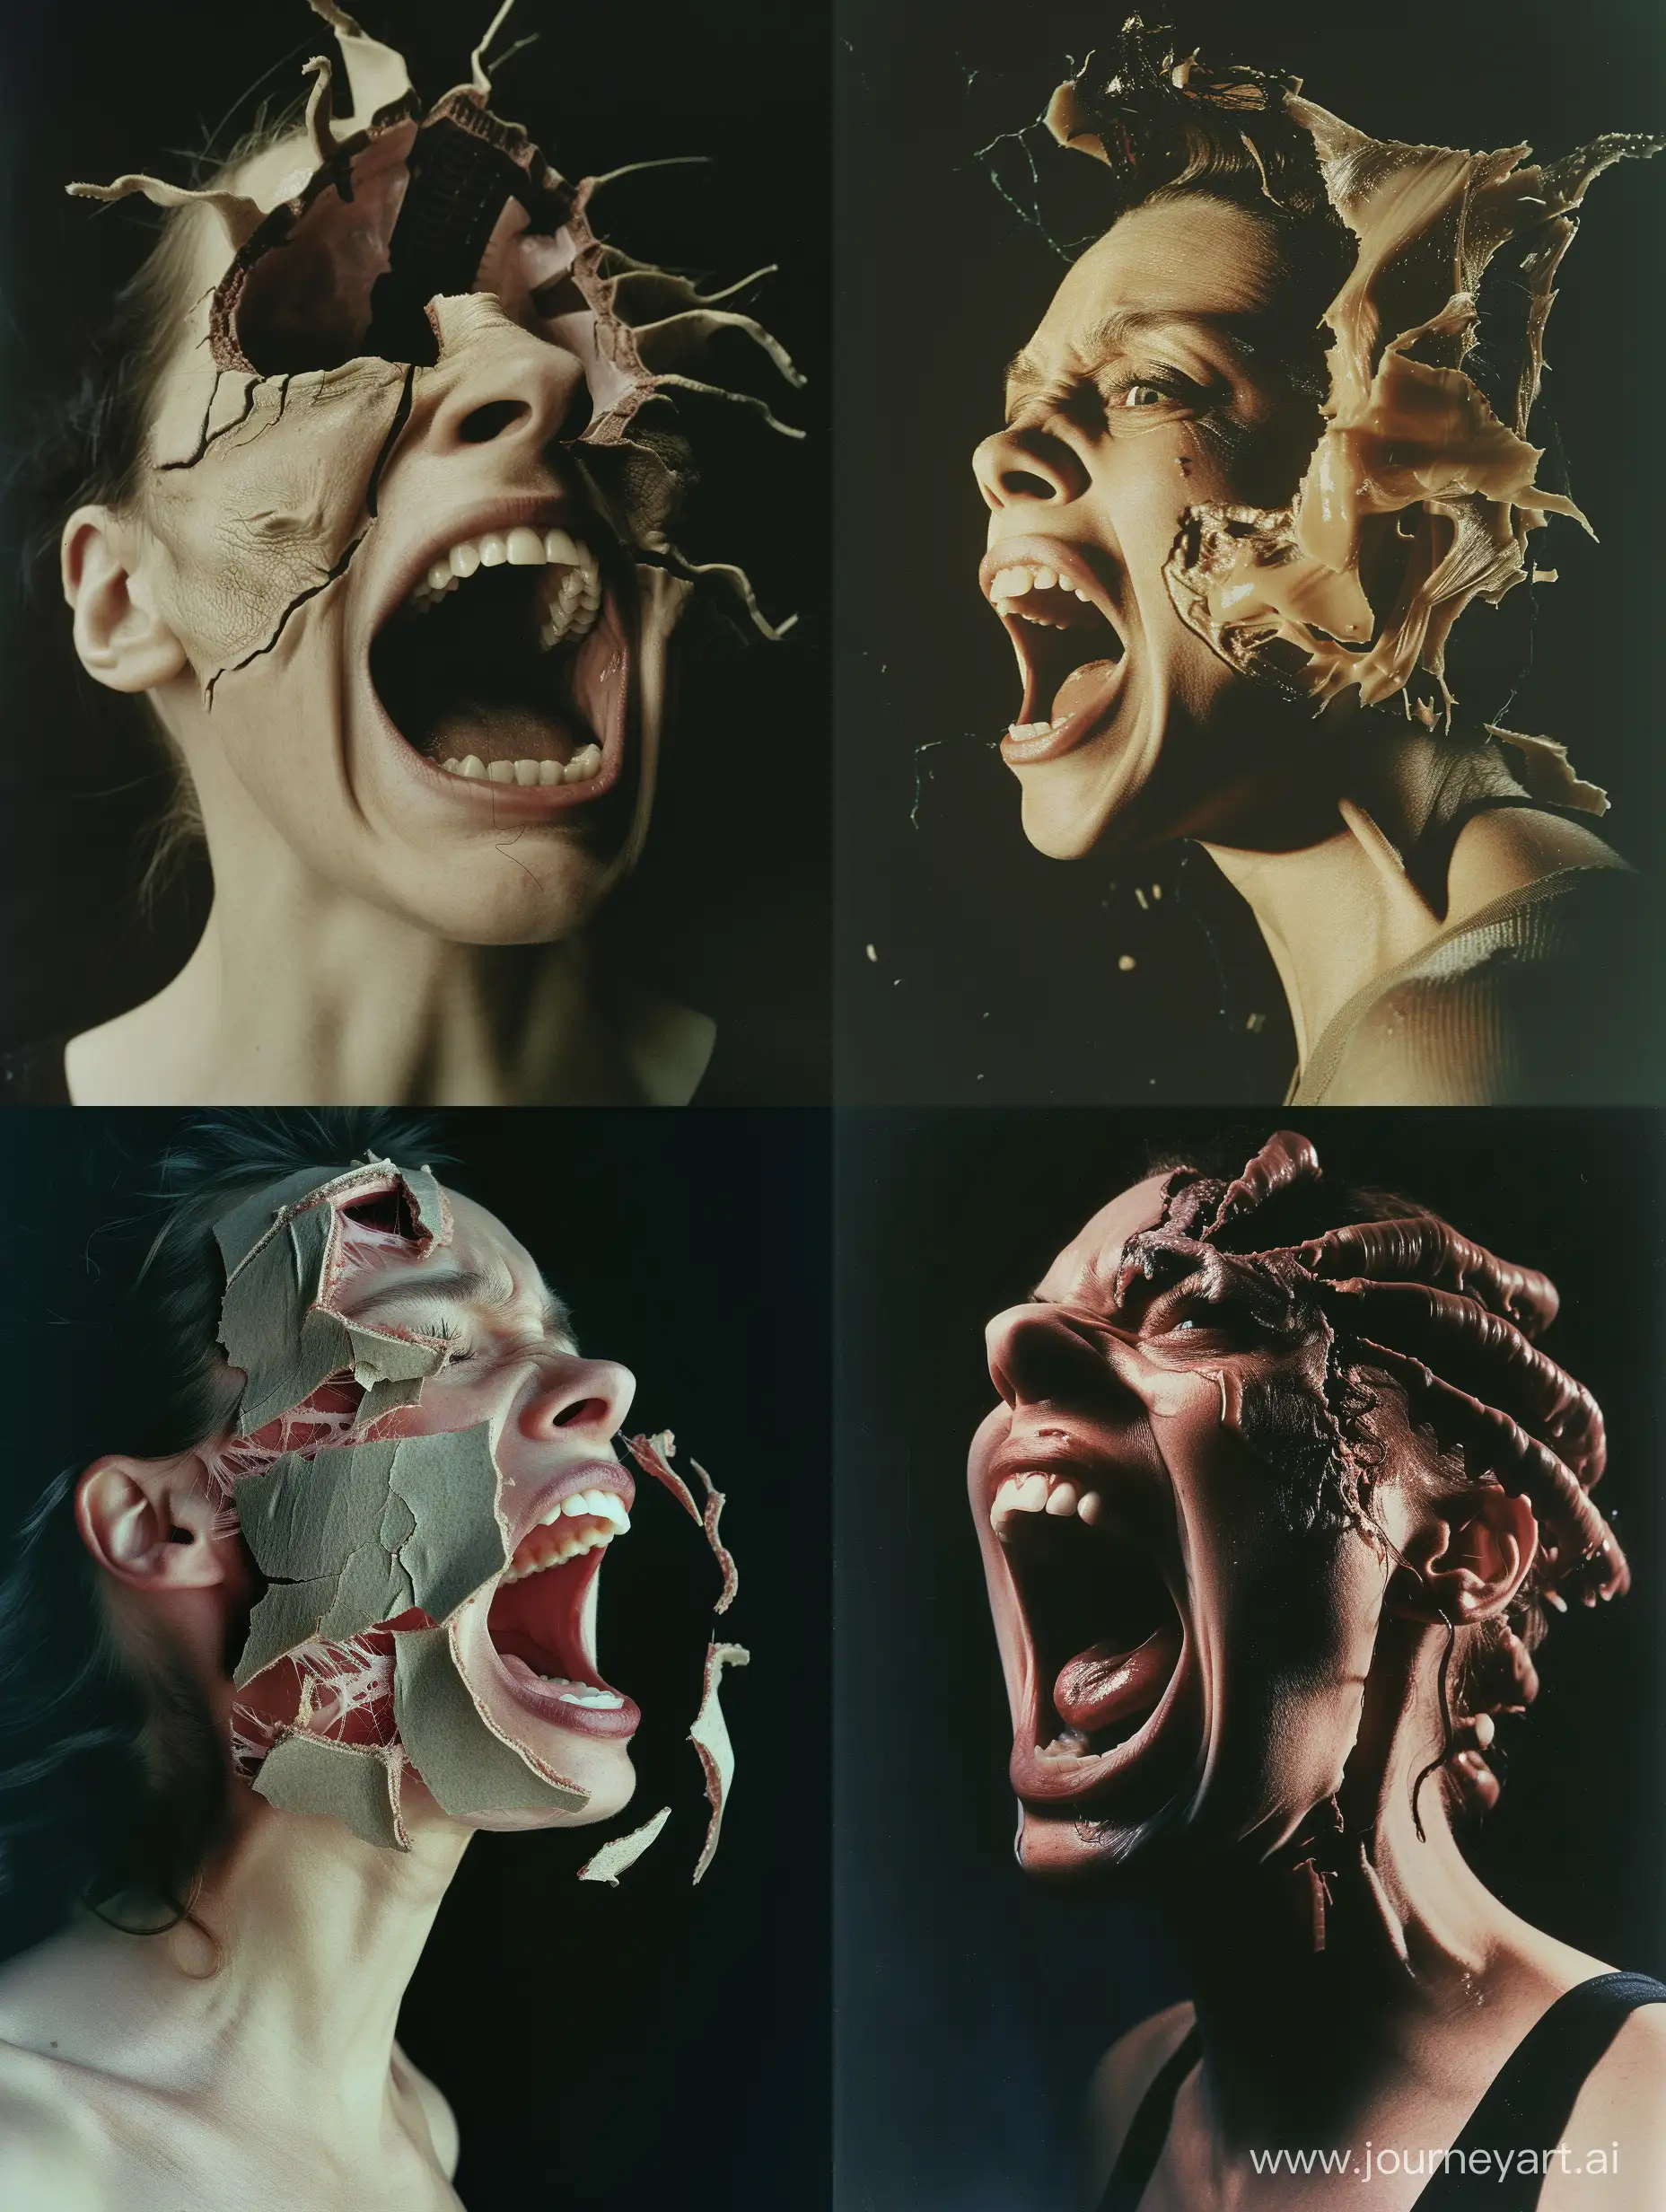 Color photo of a woman with an open mouth, screaming,  her face appearing as if it's ripping while she morphs into some sort of creature, with certain areas stretched thin and seemingly on the verge of tearing. Despite the distorted features, her femininity remains discernible. Her mouth, pulled apart and elongated from the corners, adds an unsettling touch to the overall image. Capture the surreal and captivating essence of this transformation, where the boundaries of human form blur and transcend, taken on provia